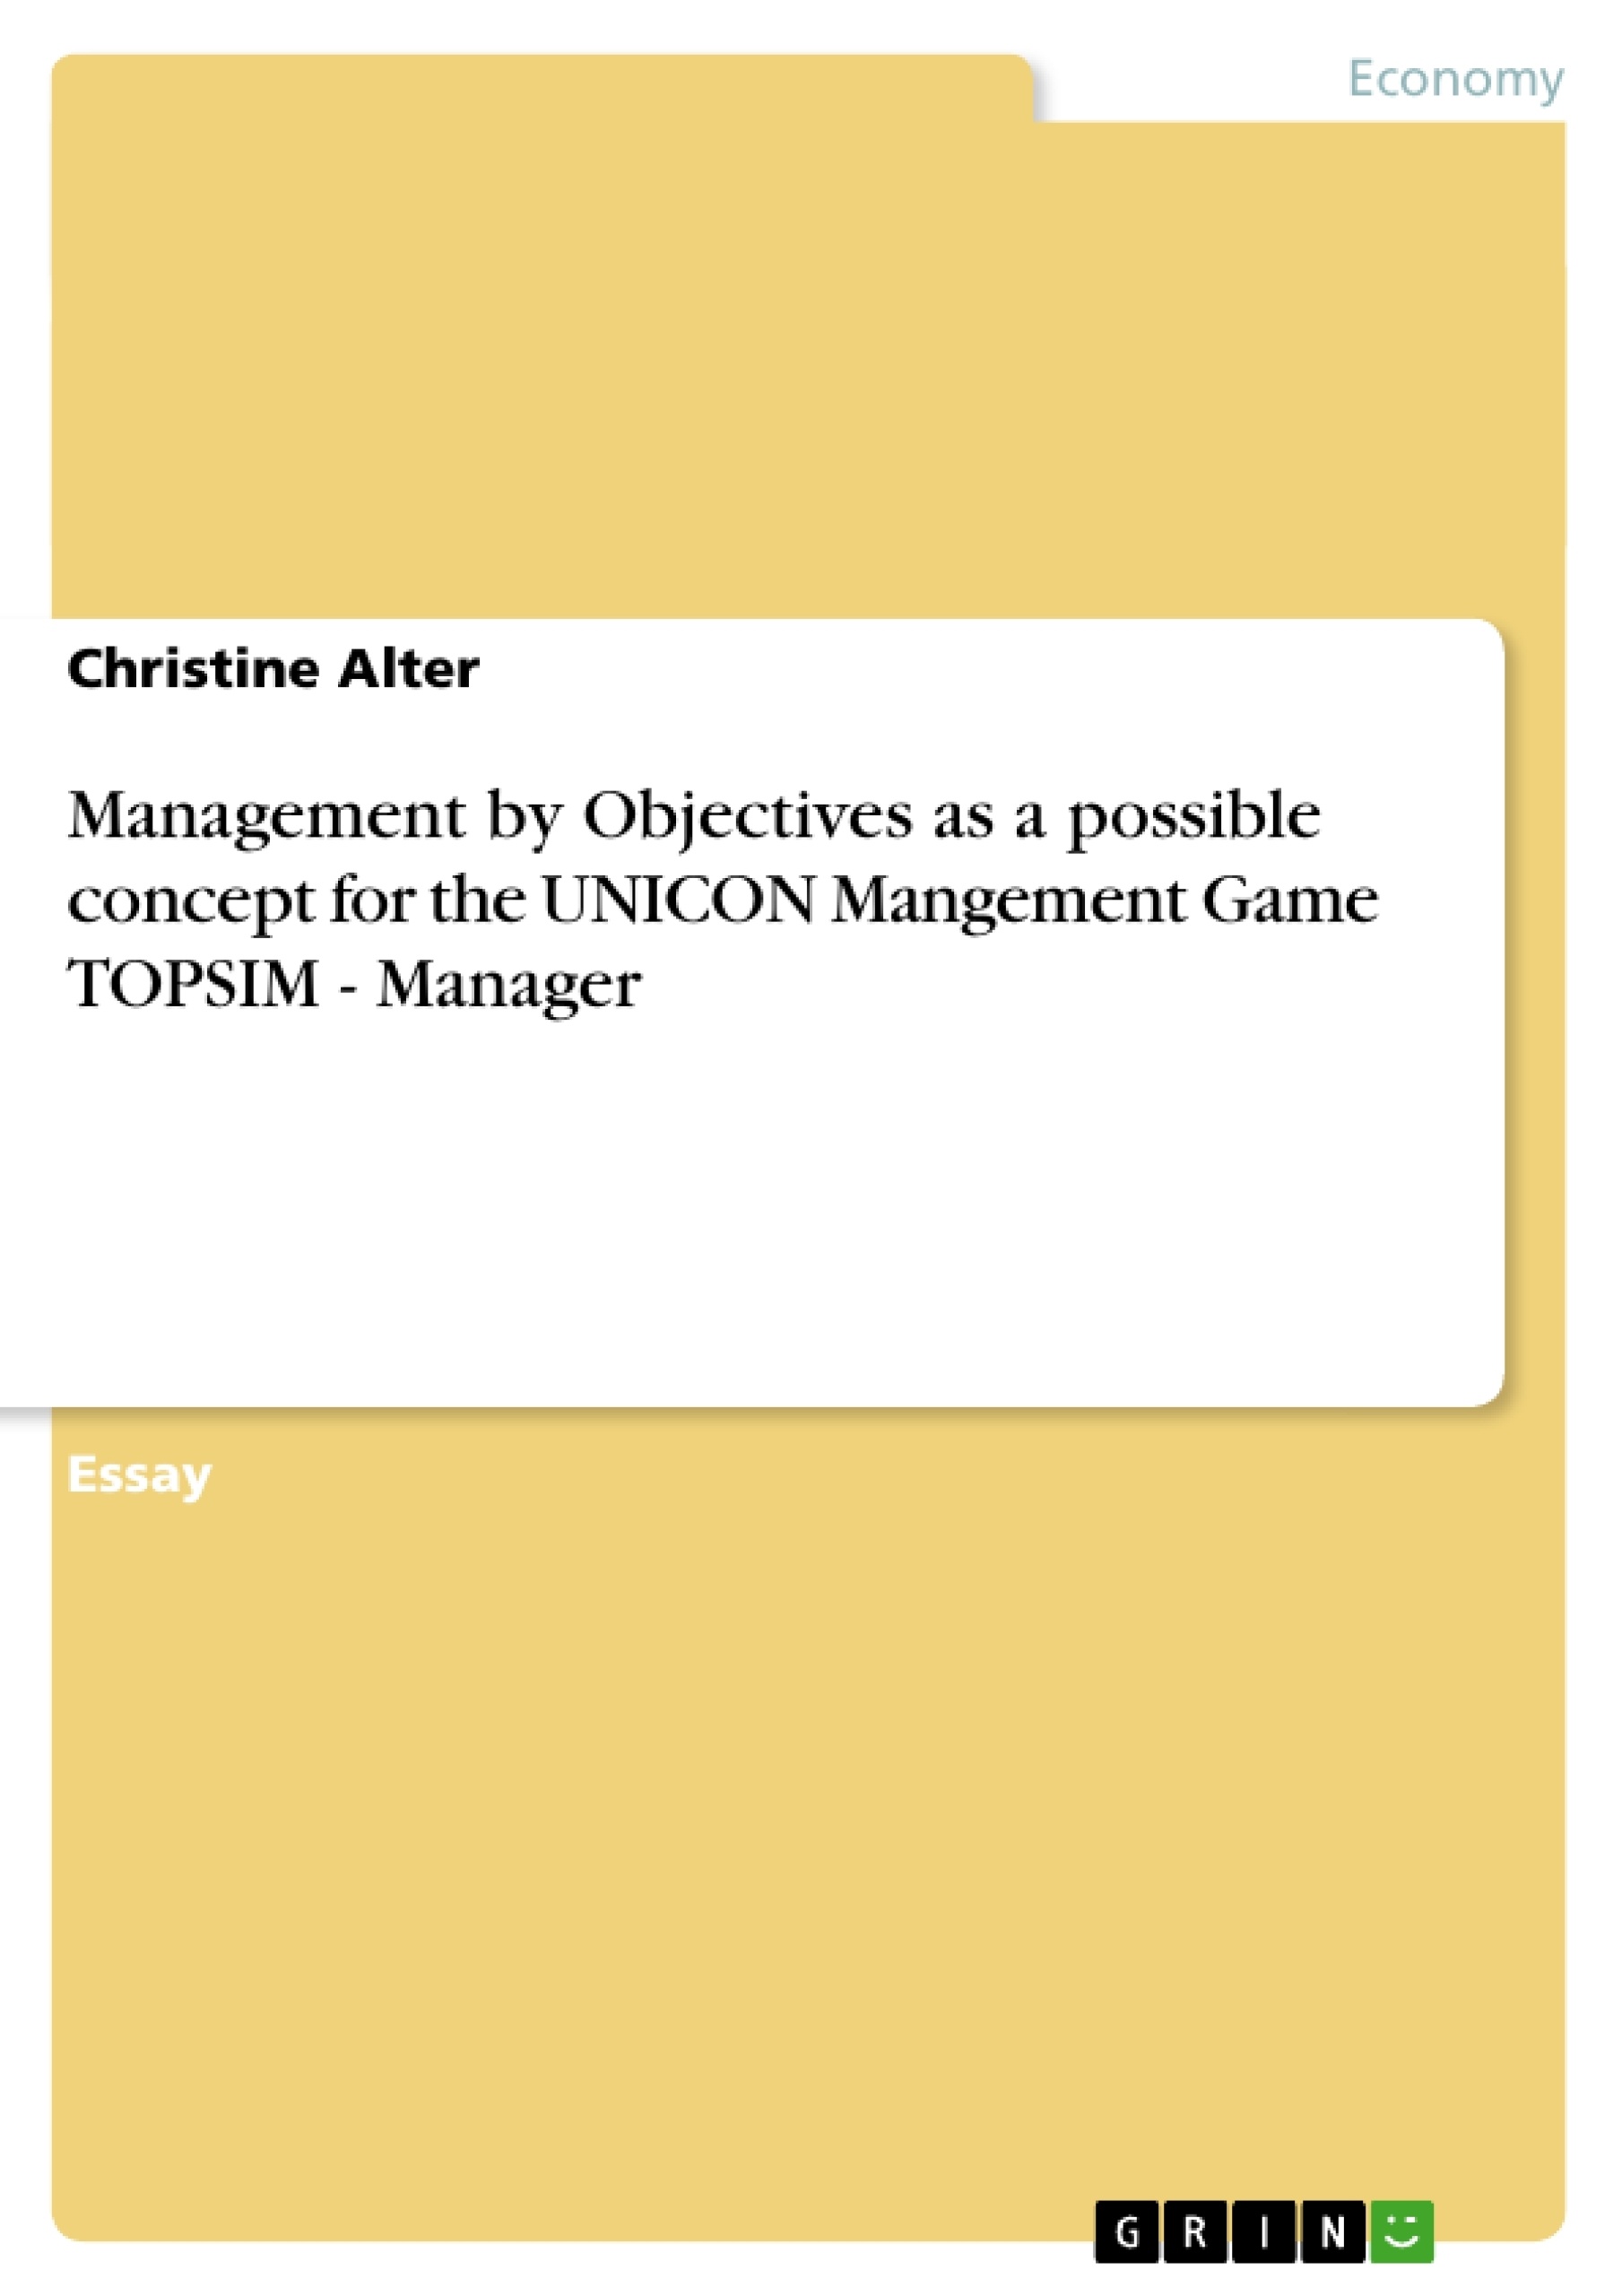 Title: Management by Objectives as a possible concept for the UNICON Mangement Game TOPSIM - Manager